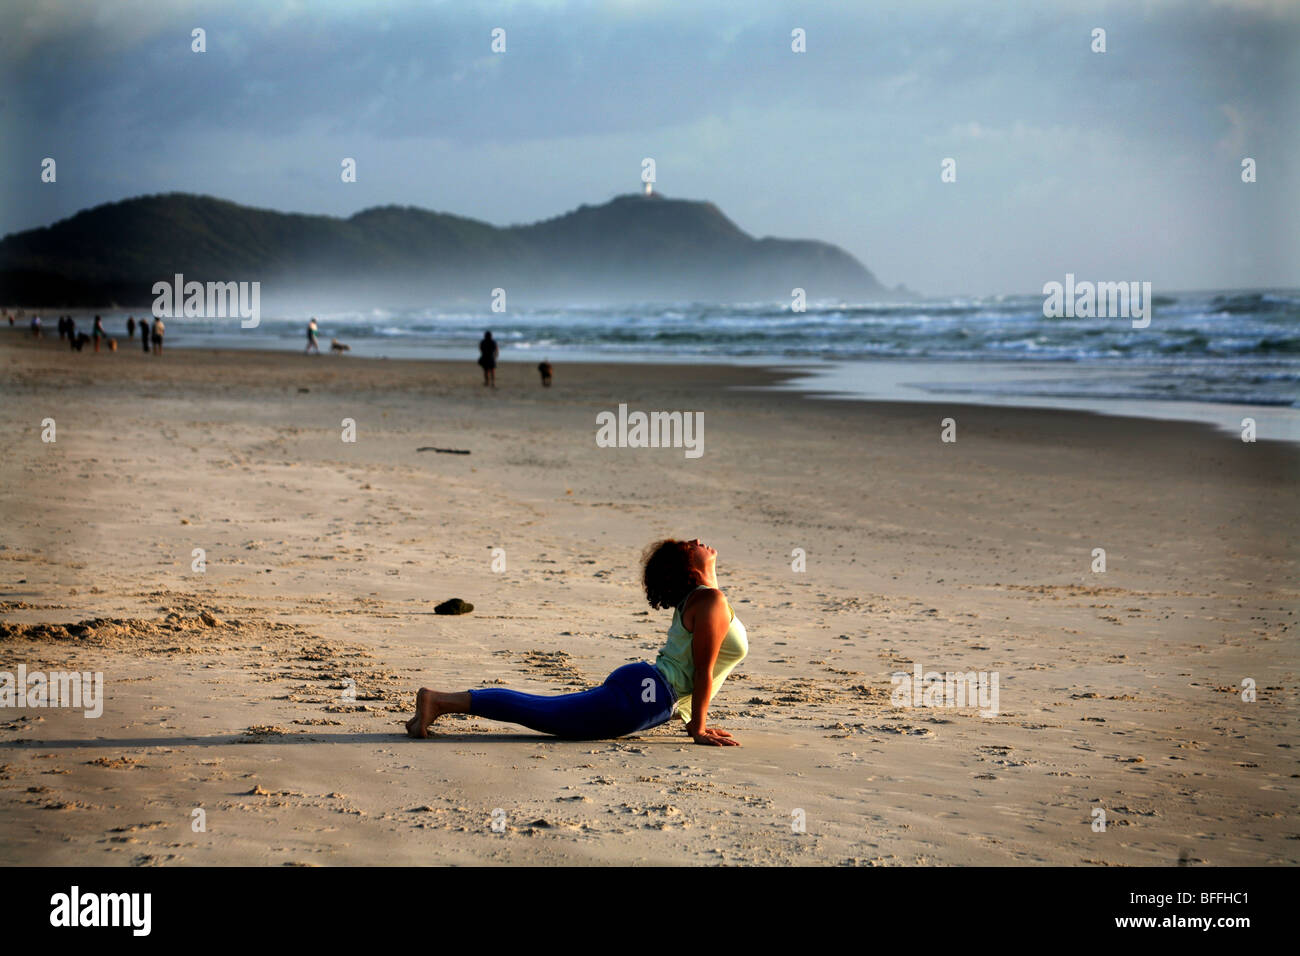 A woman arches her back in the Cobra pose during a morning yoga program at Tallow beach Stock Photo